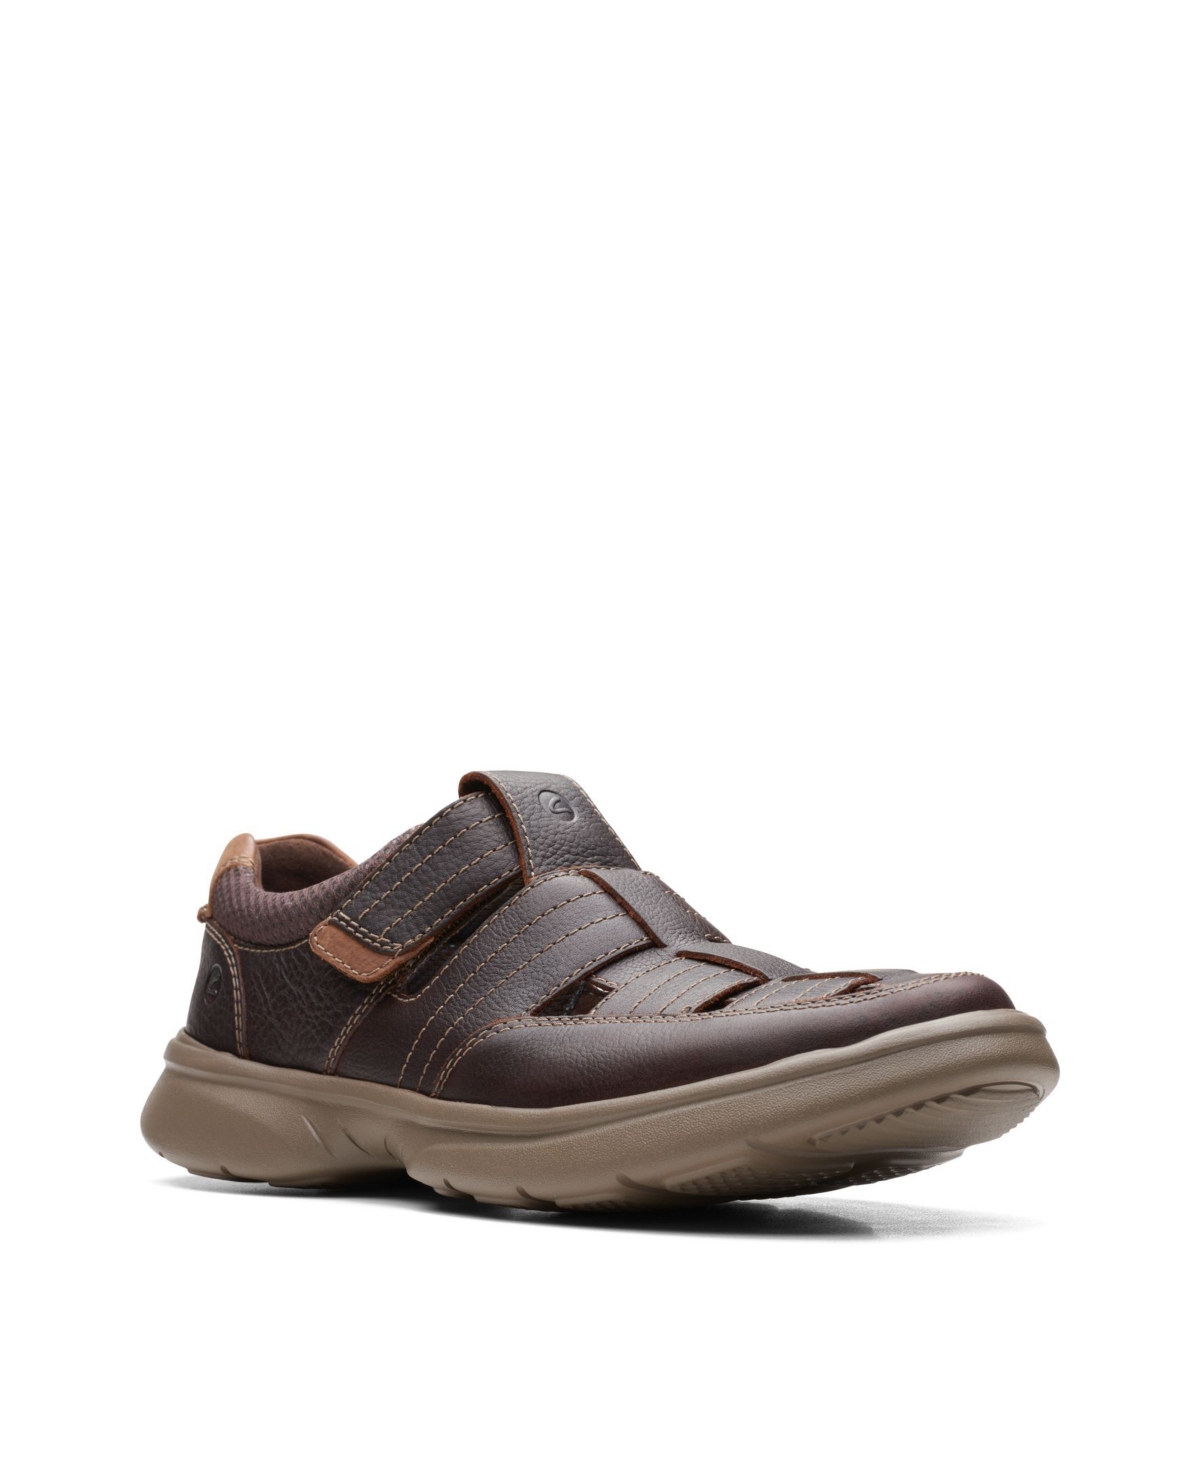 Clarks Men's Bradley Cove Shoes Men's Shoes In Brown Tumbled